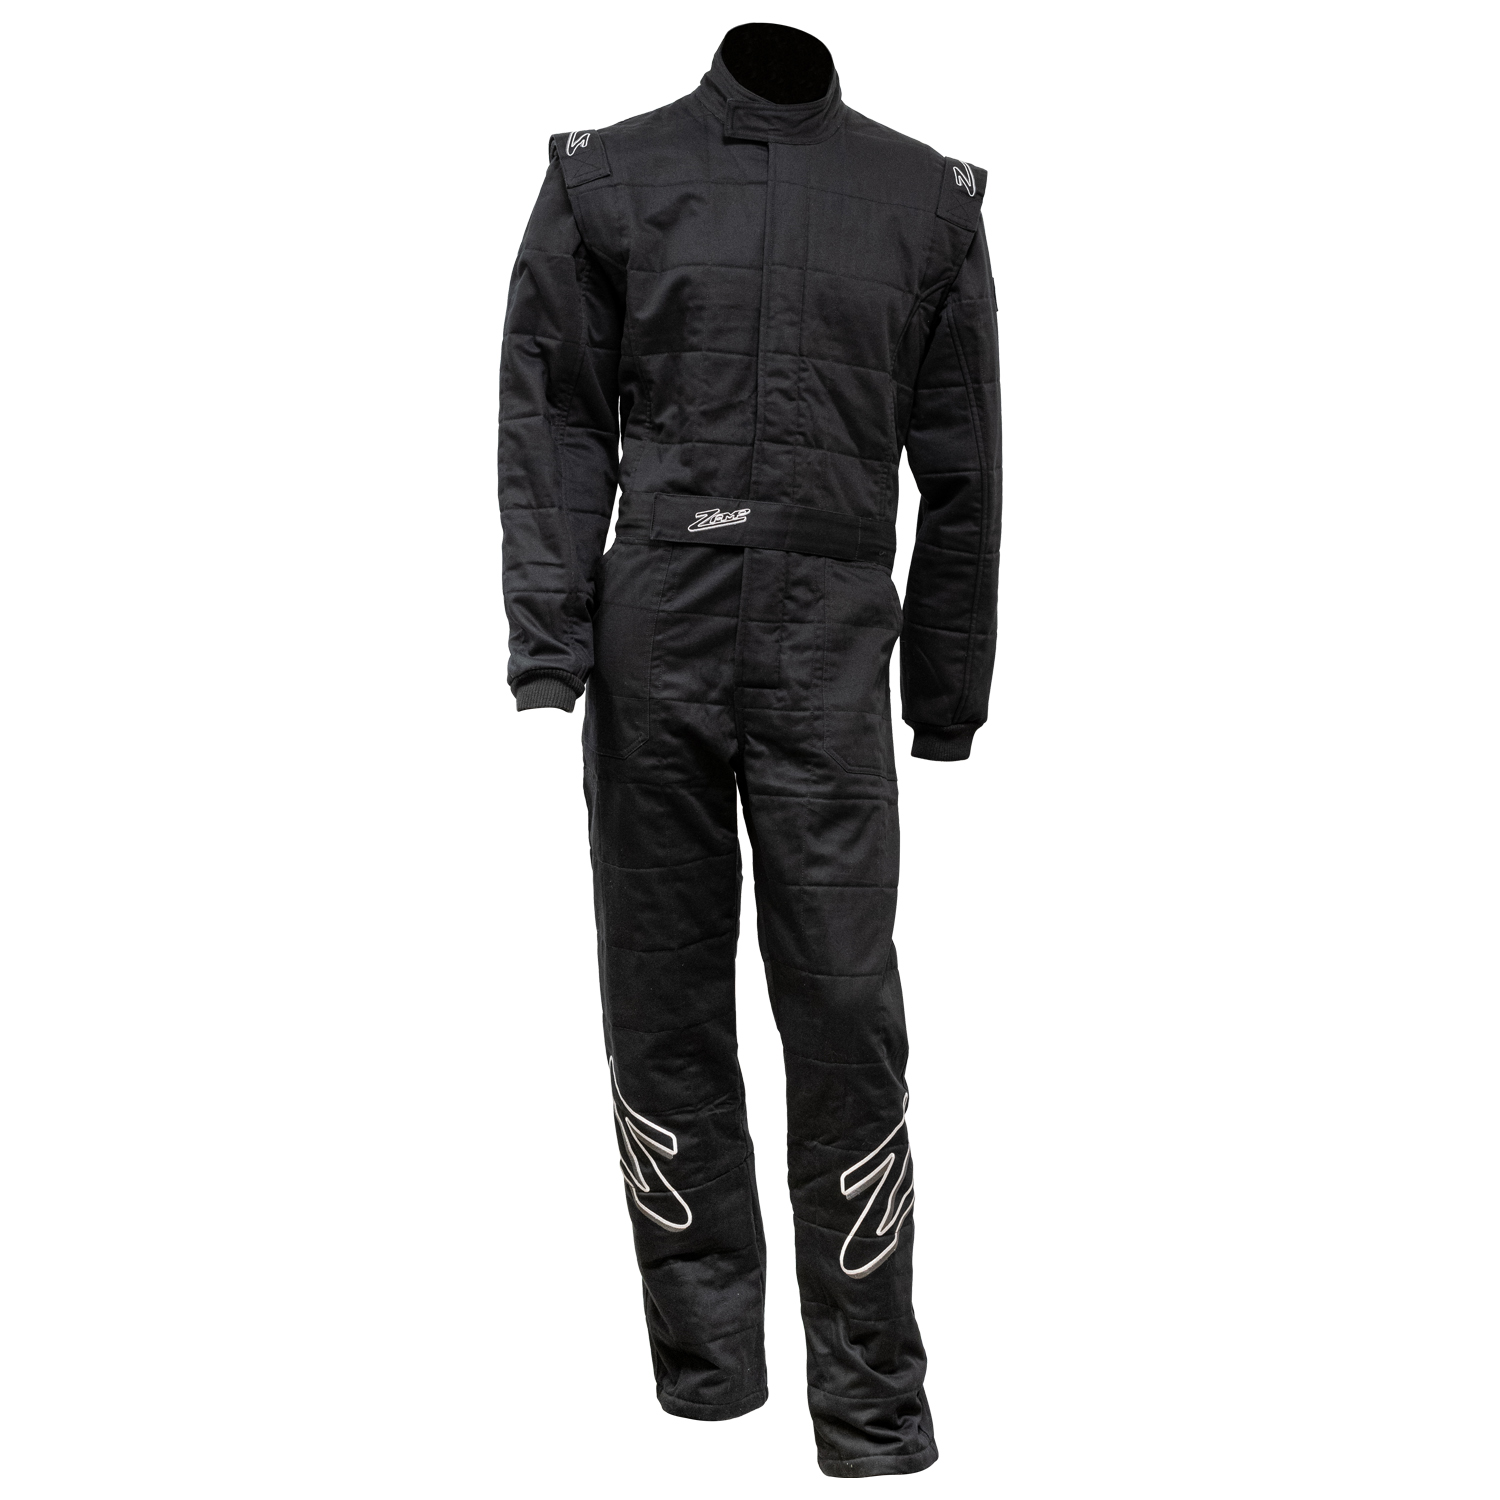 BLK 3 LAYER SUIT SMALL